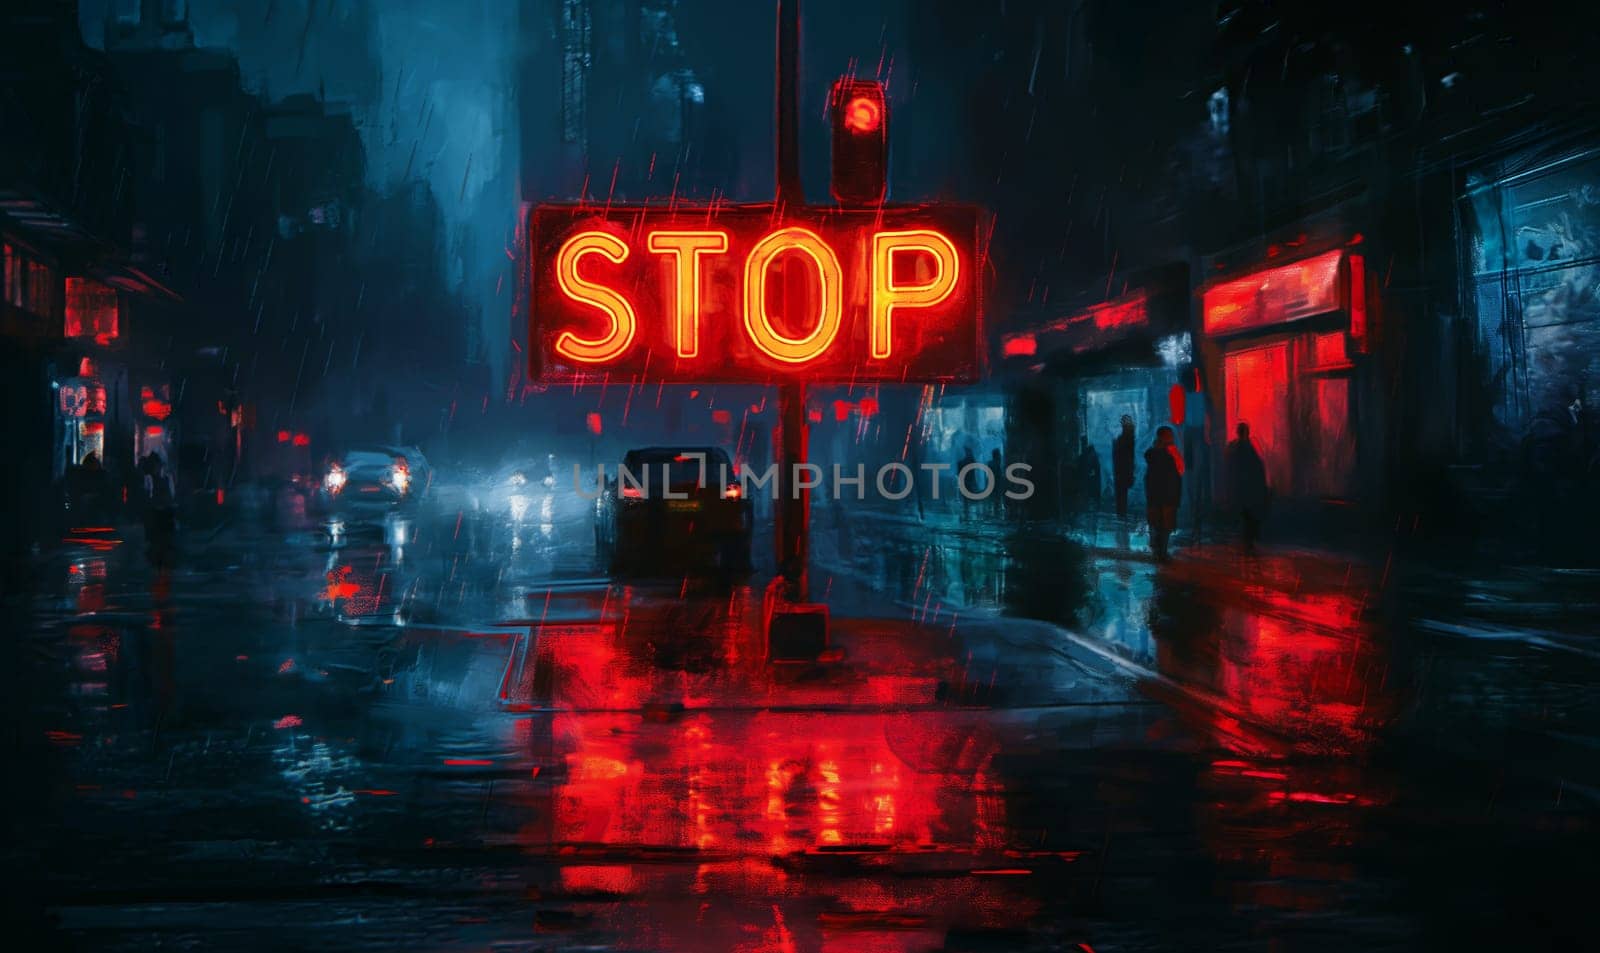 Illuminated Stop Sign at Dusk in the Rain. by Fischeron